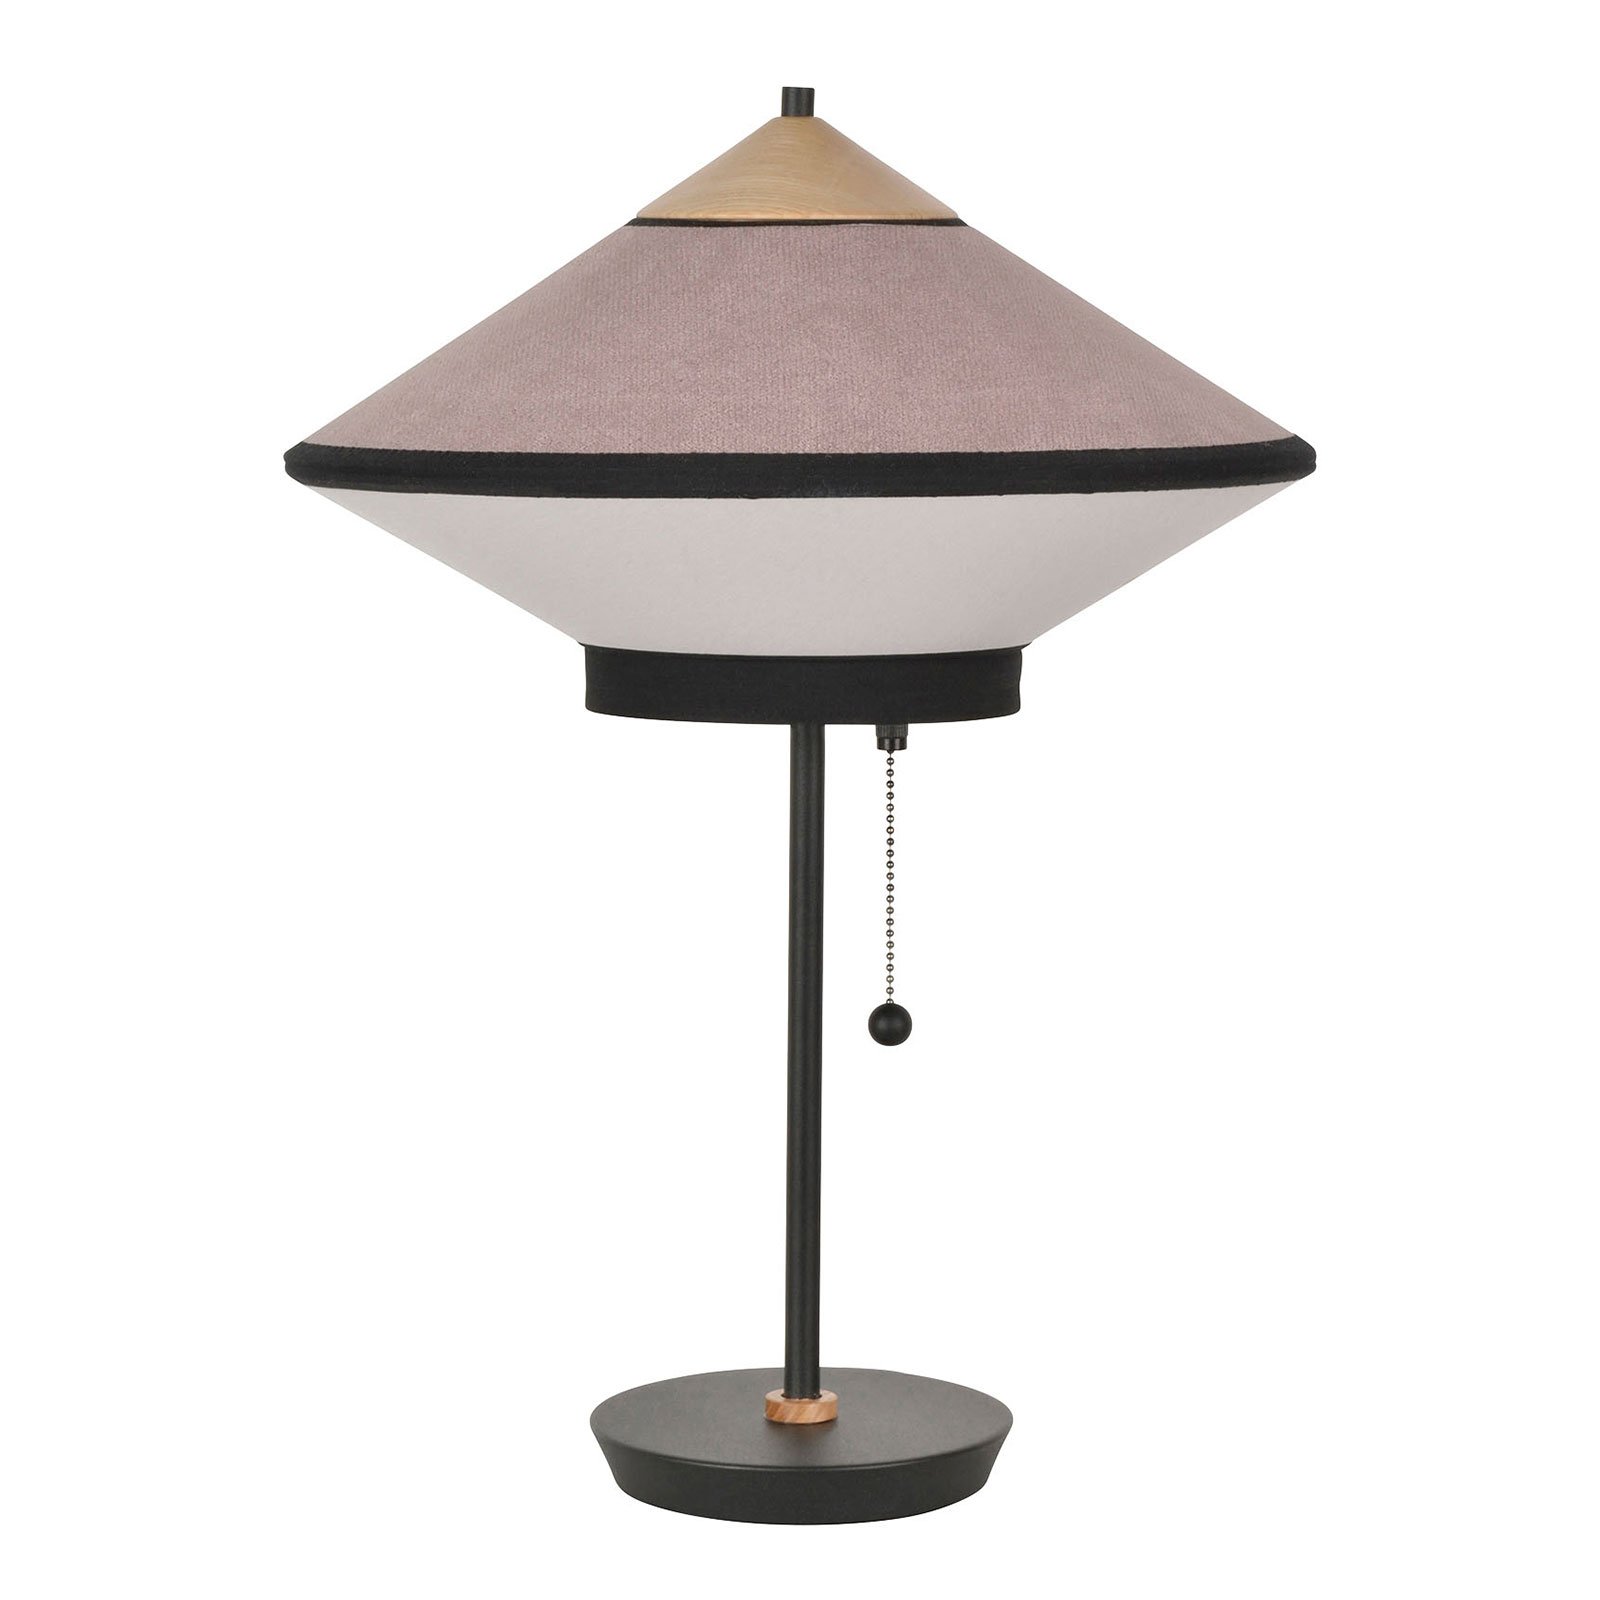 Forestier Cymbal S bordlampe, pudderrosa